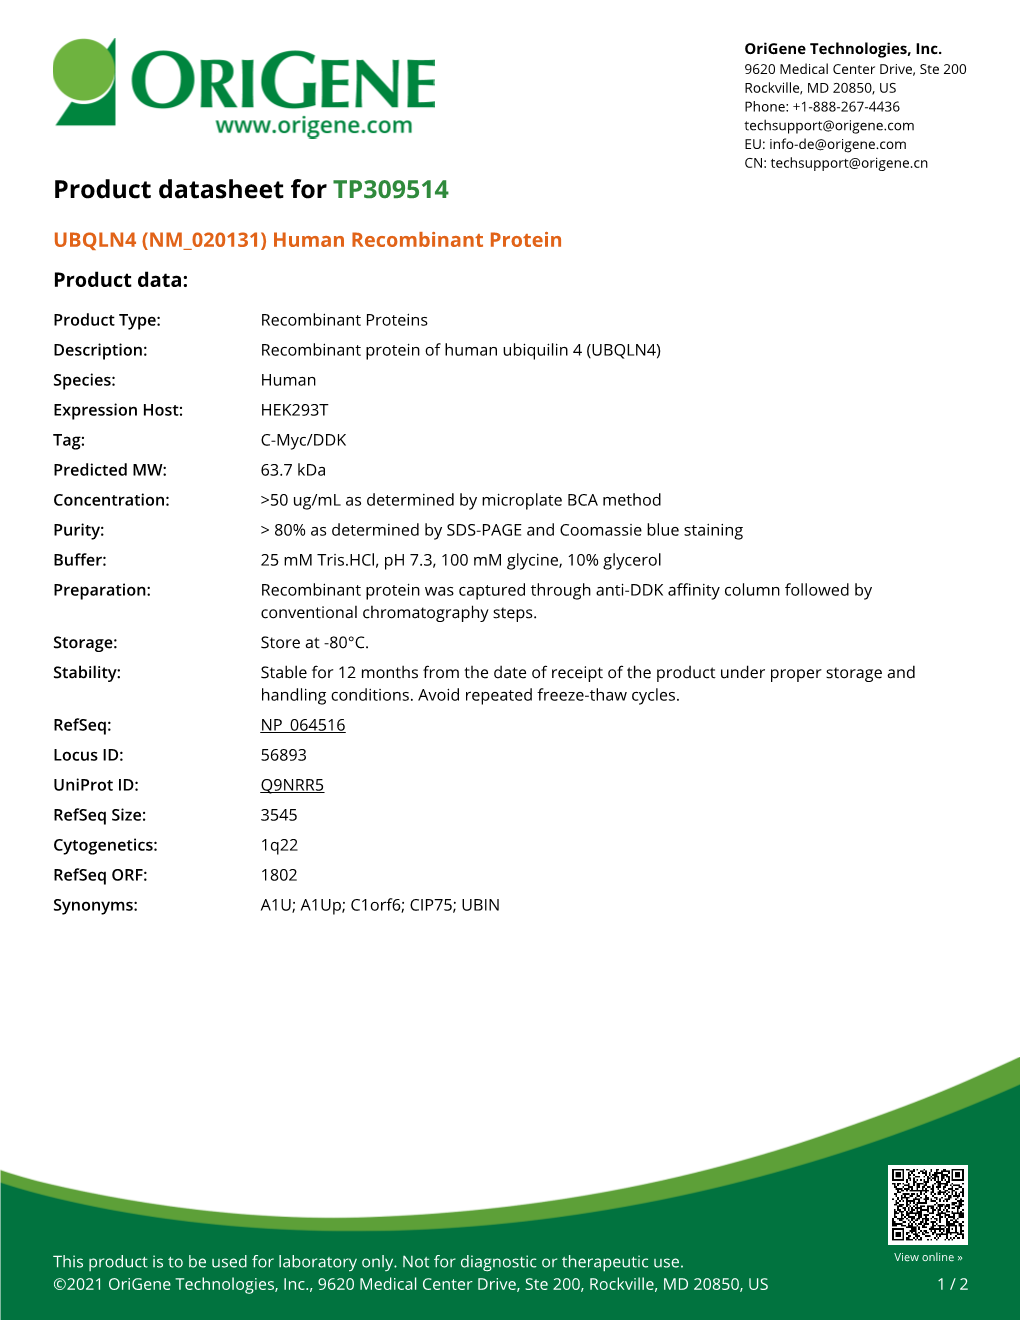 UBQLN4 (NM 020131) Human Recombinant Protein Product Data